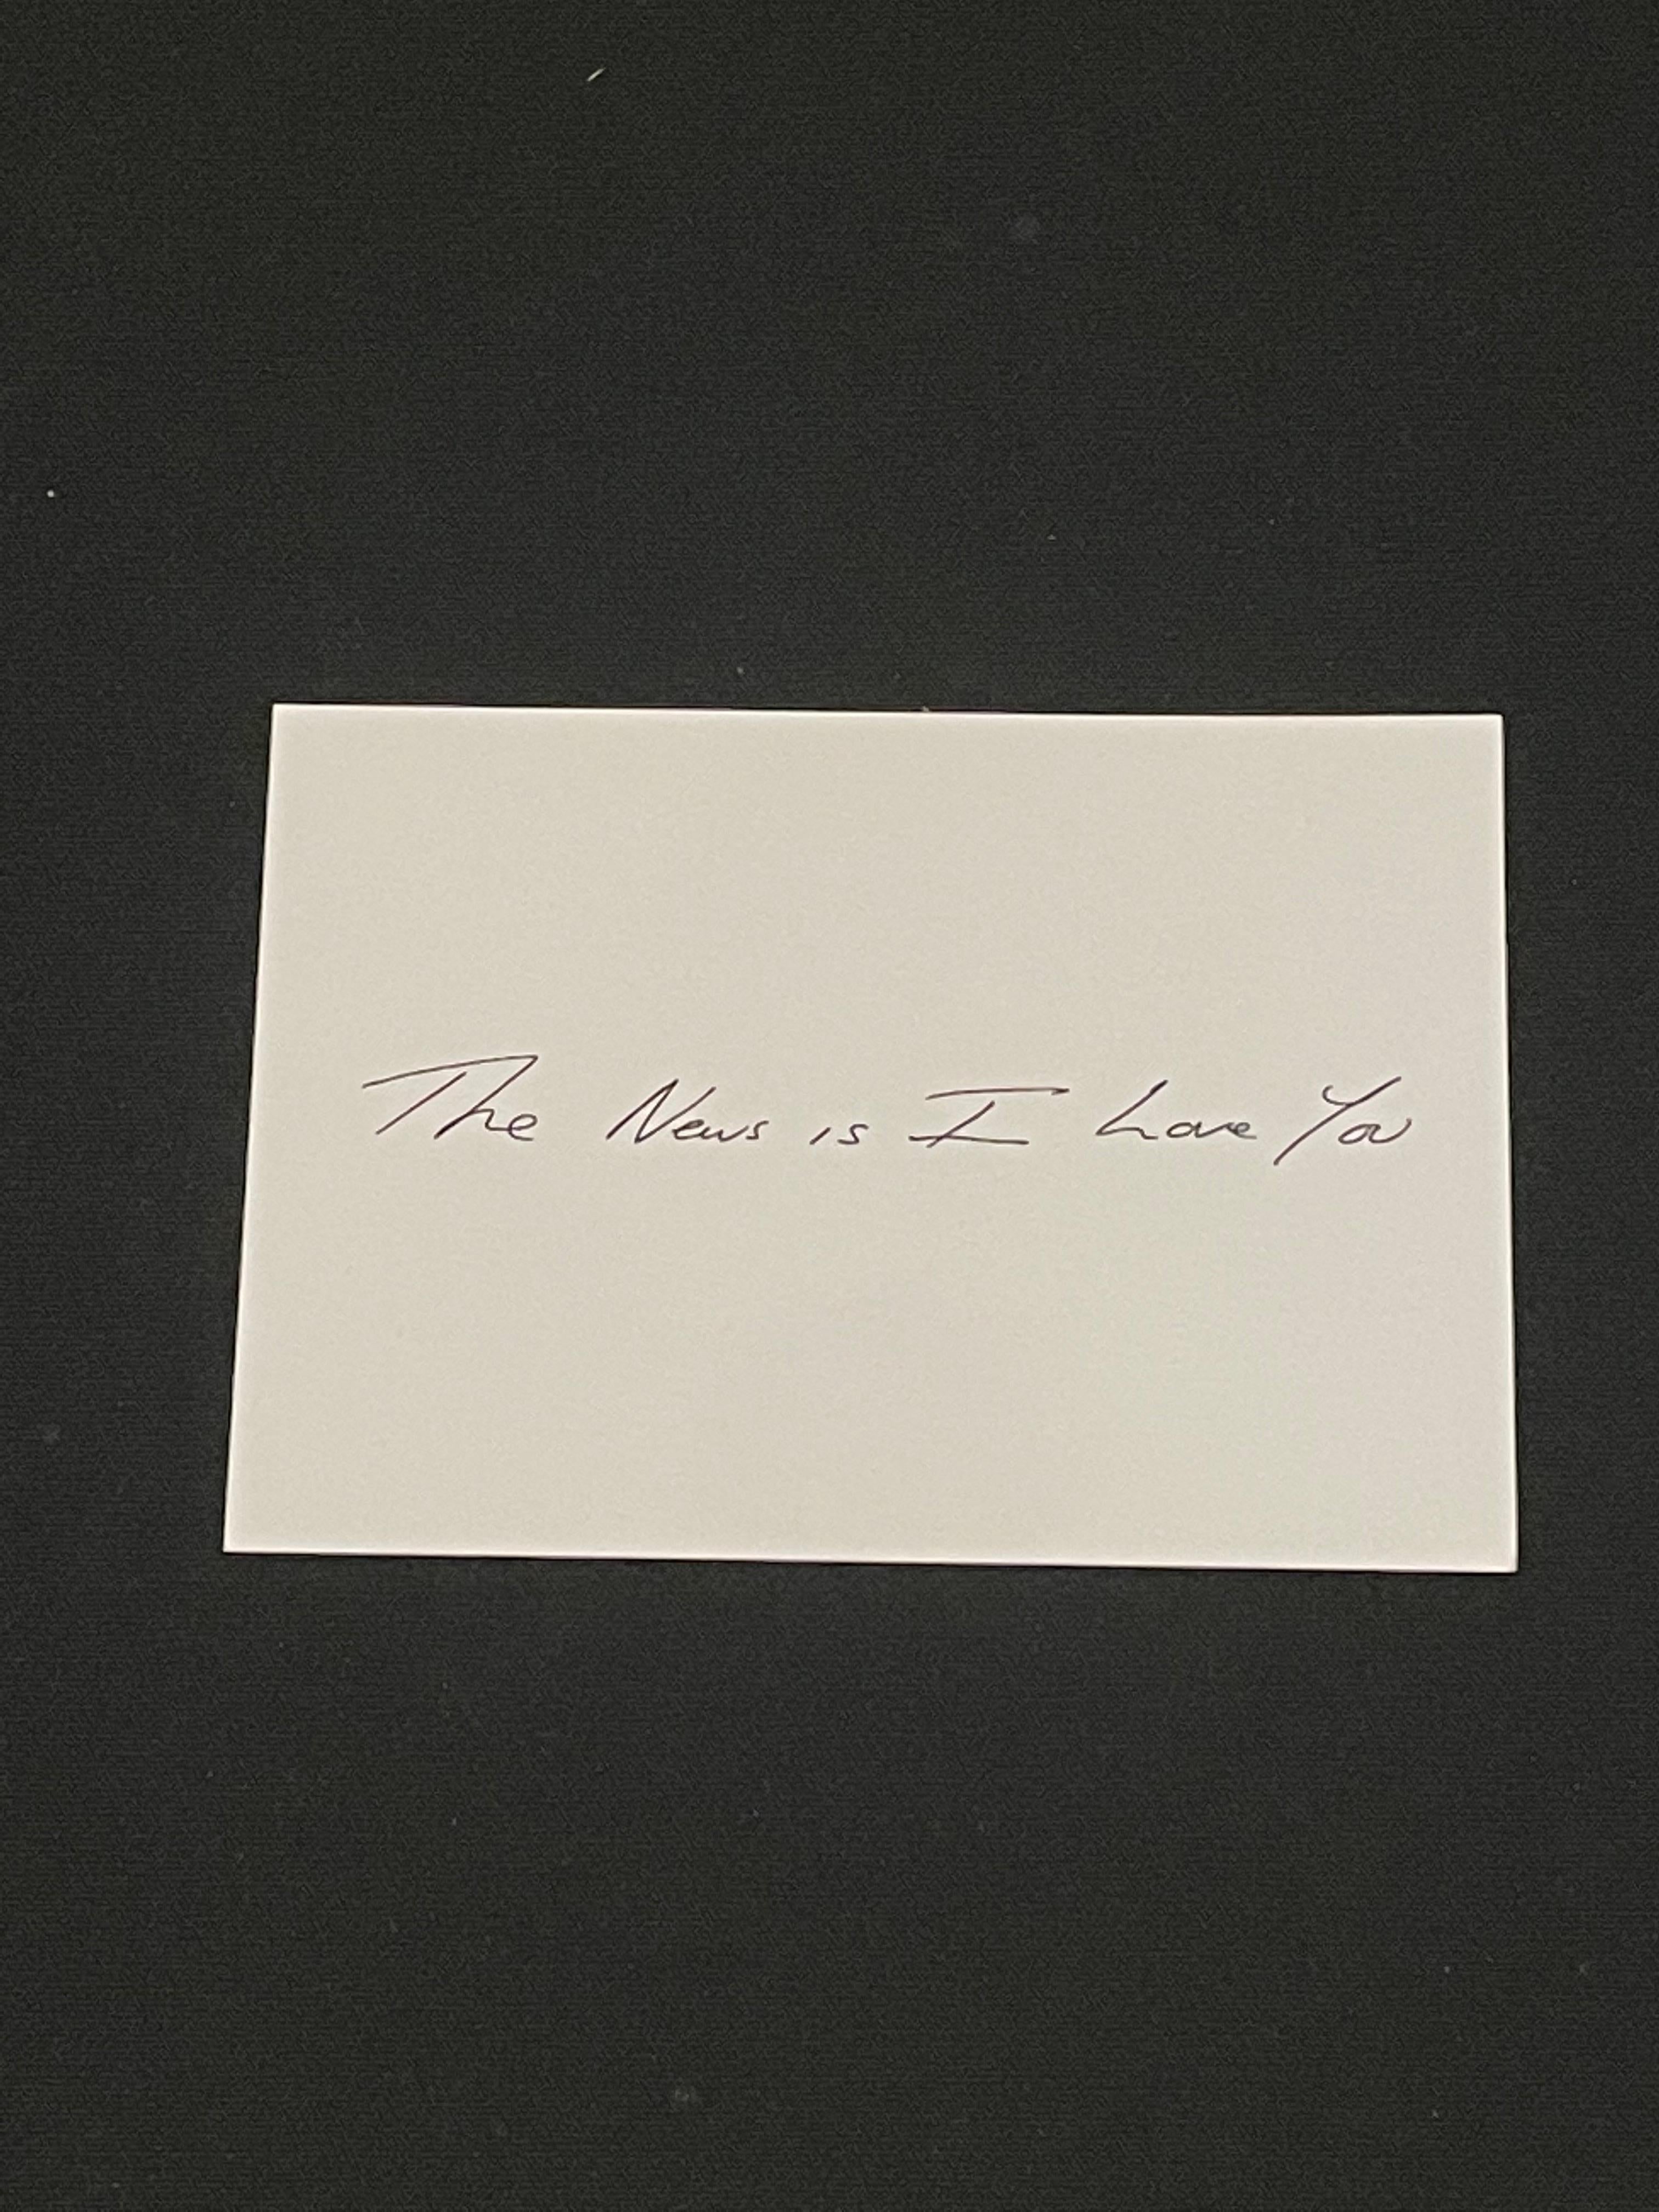 Tracey Emin, The News Is I Love You 1